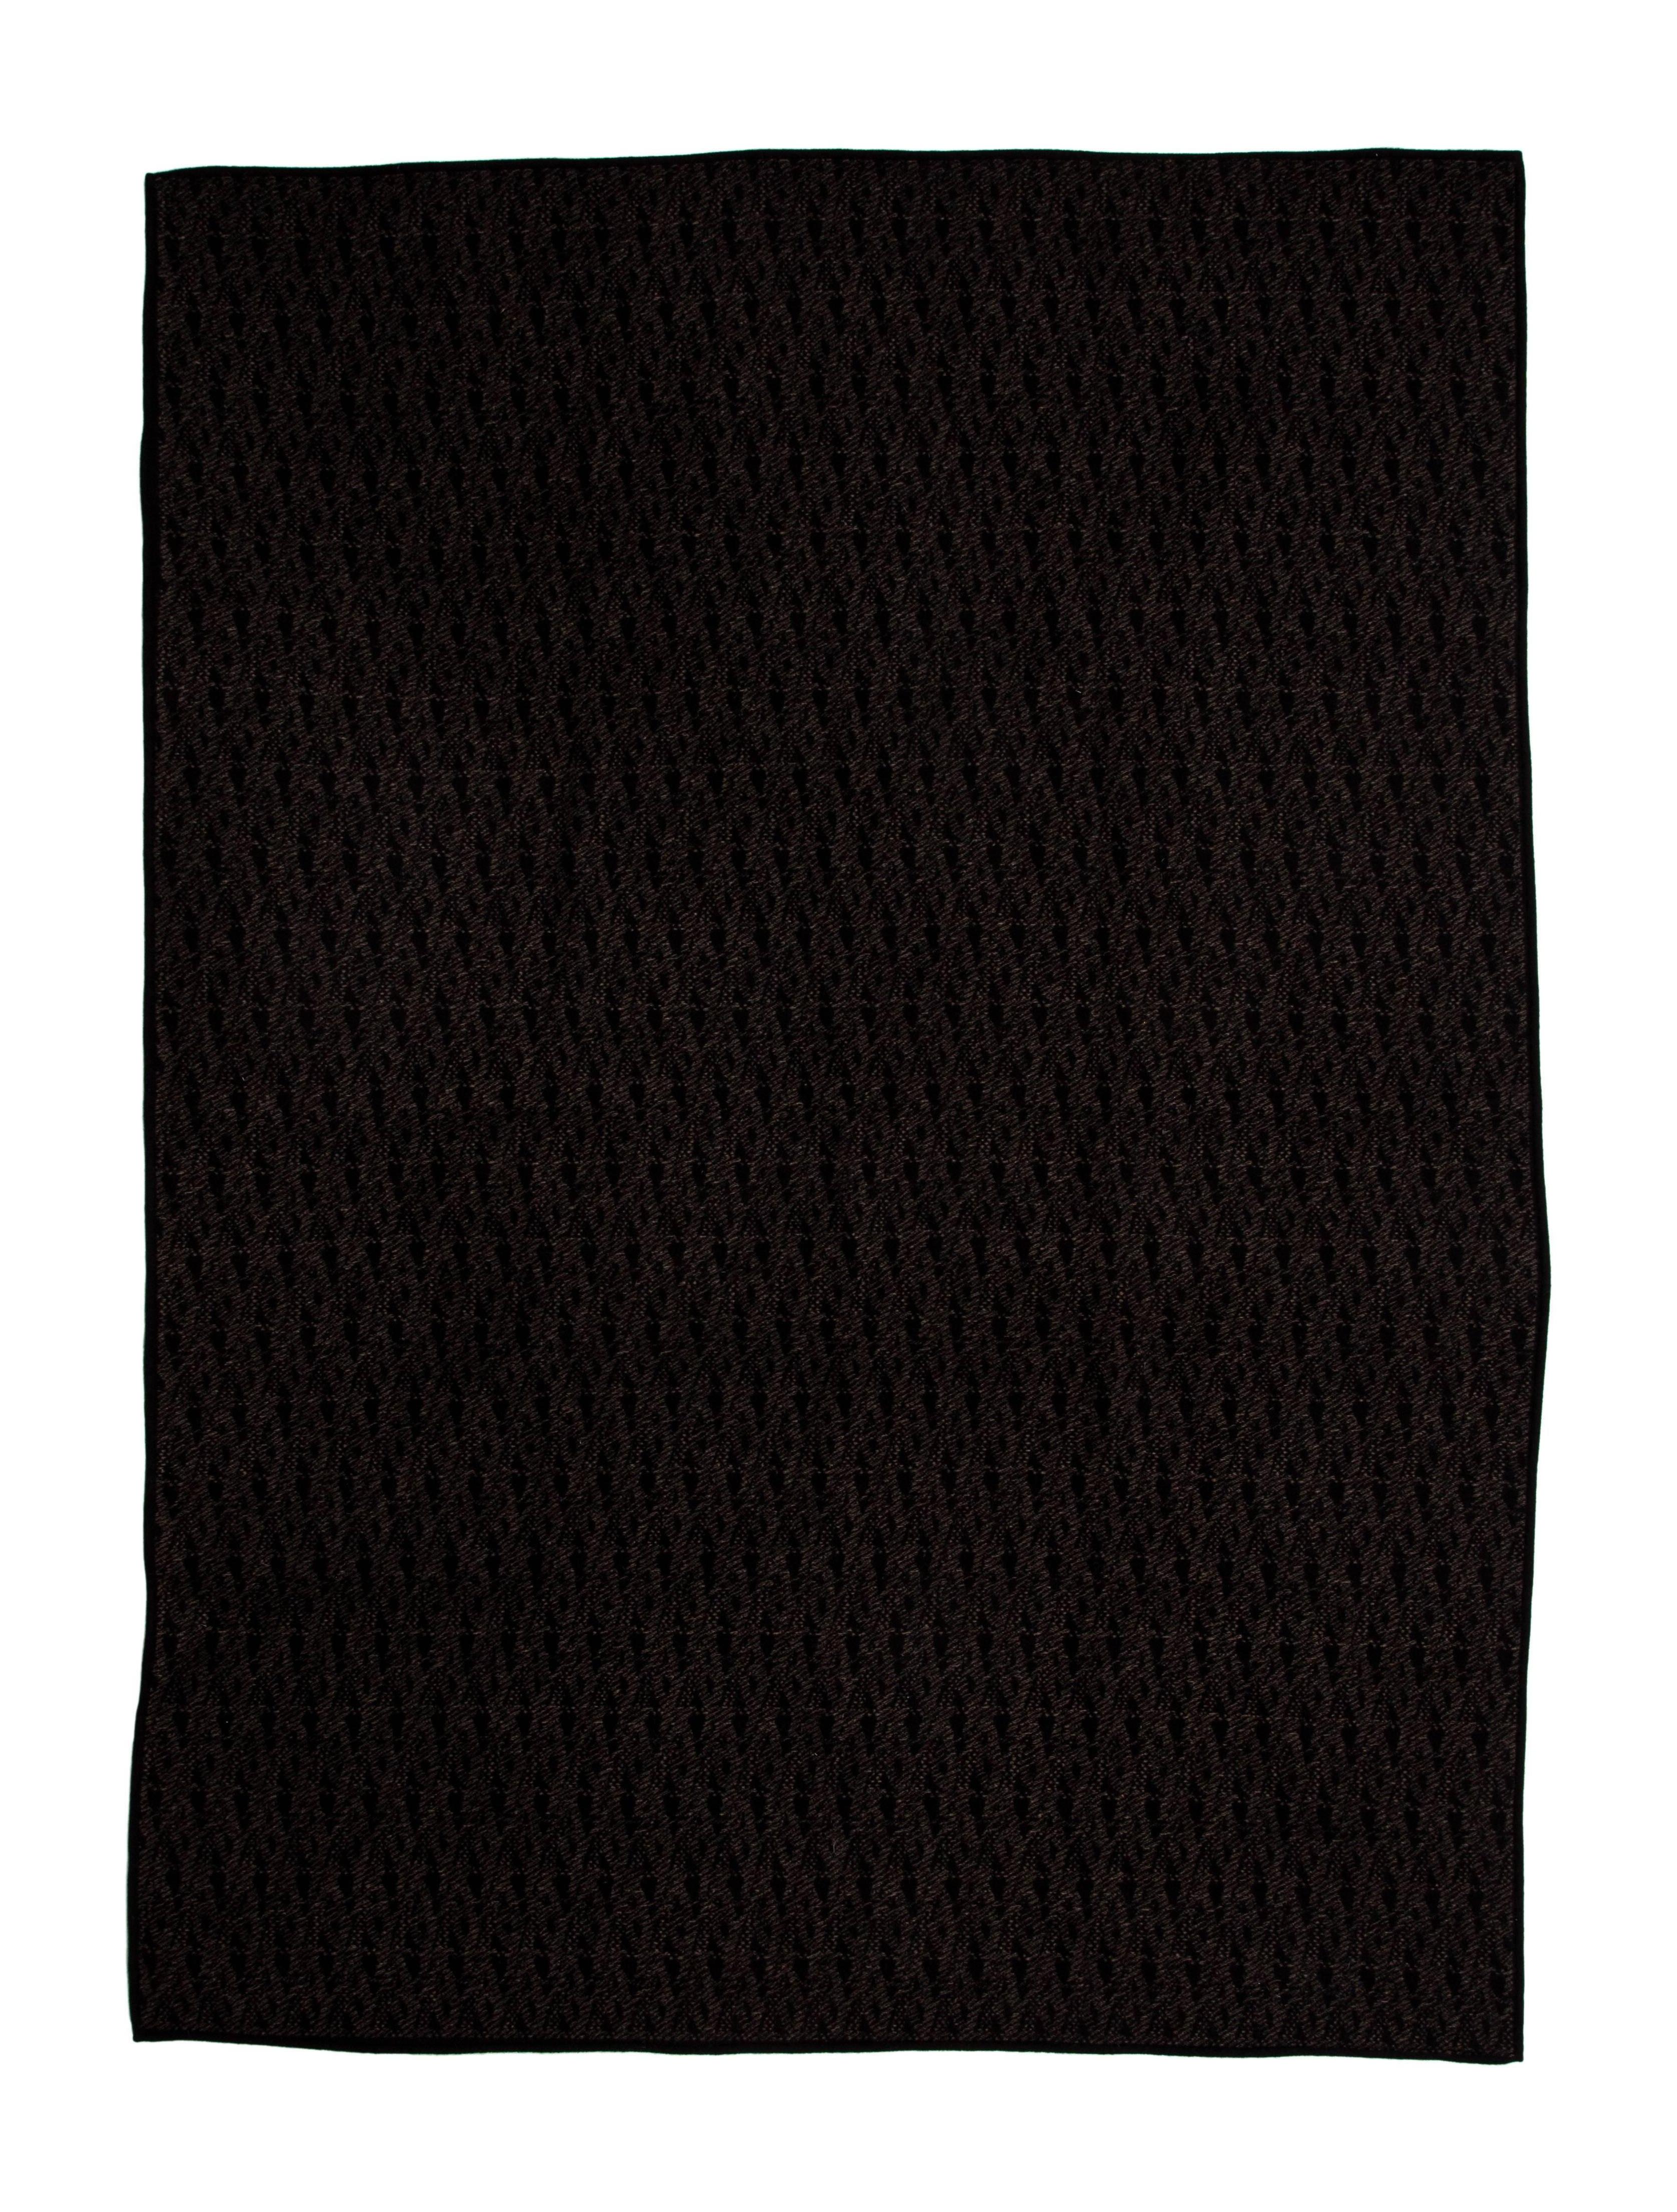 CURATOR'S NOTES

Saint Laurent New Black Brown Cashmere Reversible Men's Wool Couch Chair Throw Blanket  

Cashmere and wool
Made in Italy
Measures 50" W x 70" L 